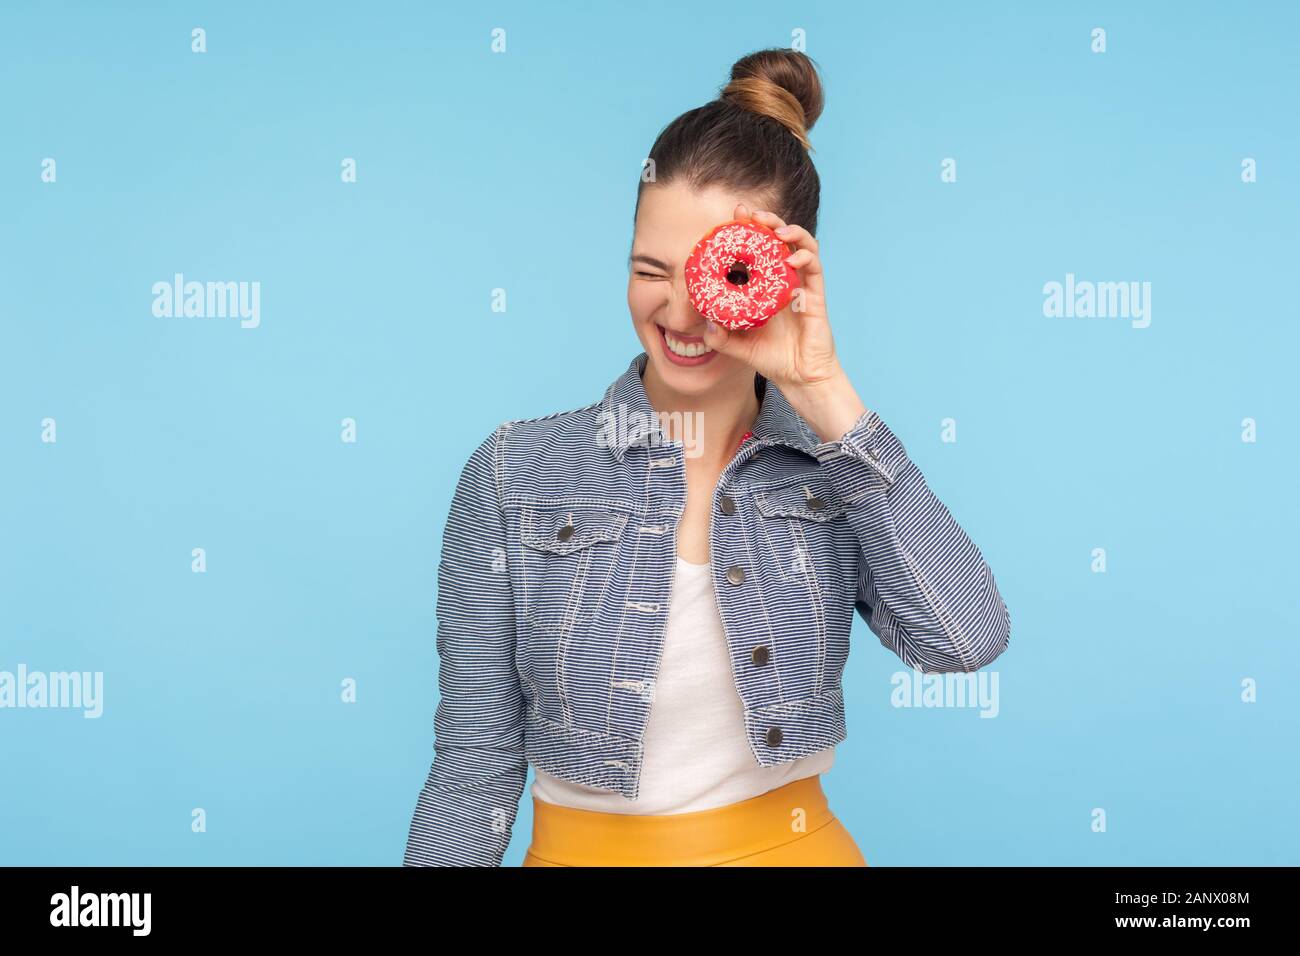 Delighted carefree girl in fashionable outfit peeking through doughnut hole and smiling, having fun with snack, looking into donut, sugary confectione Stock Photo